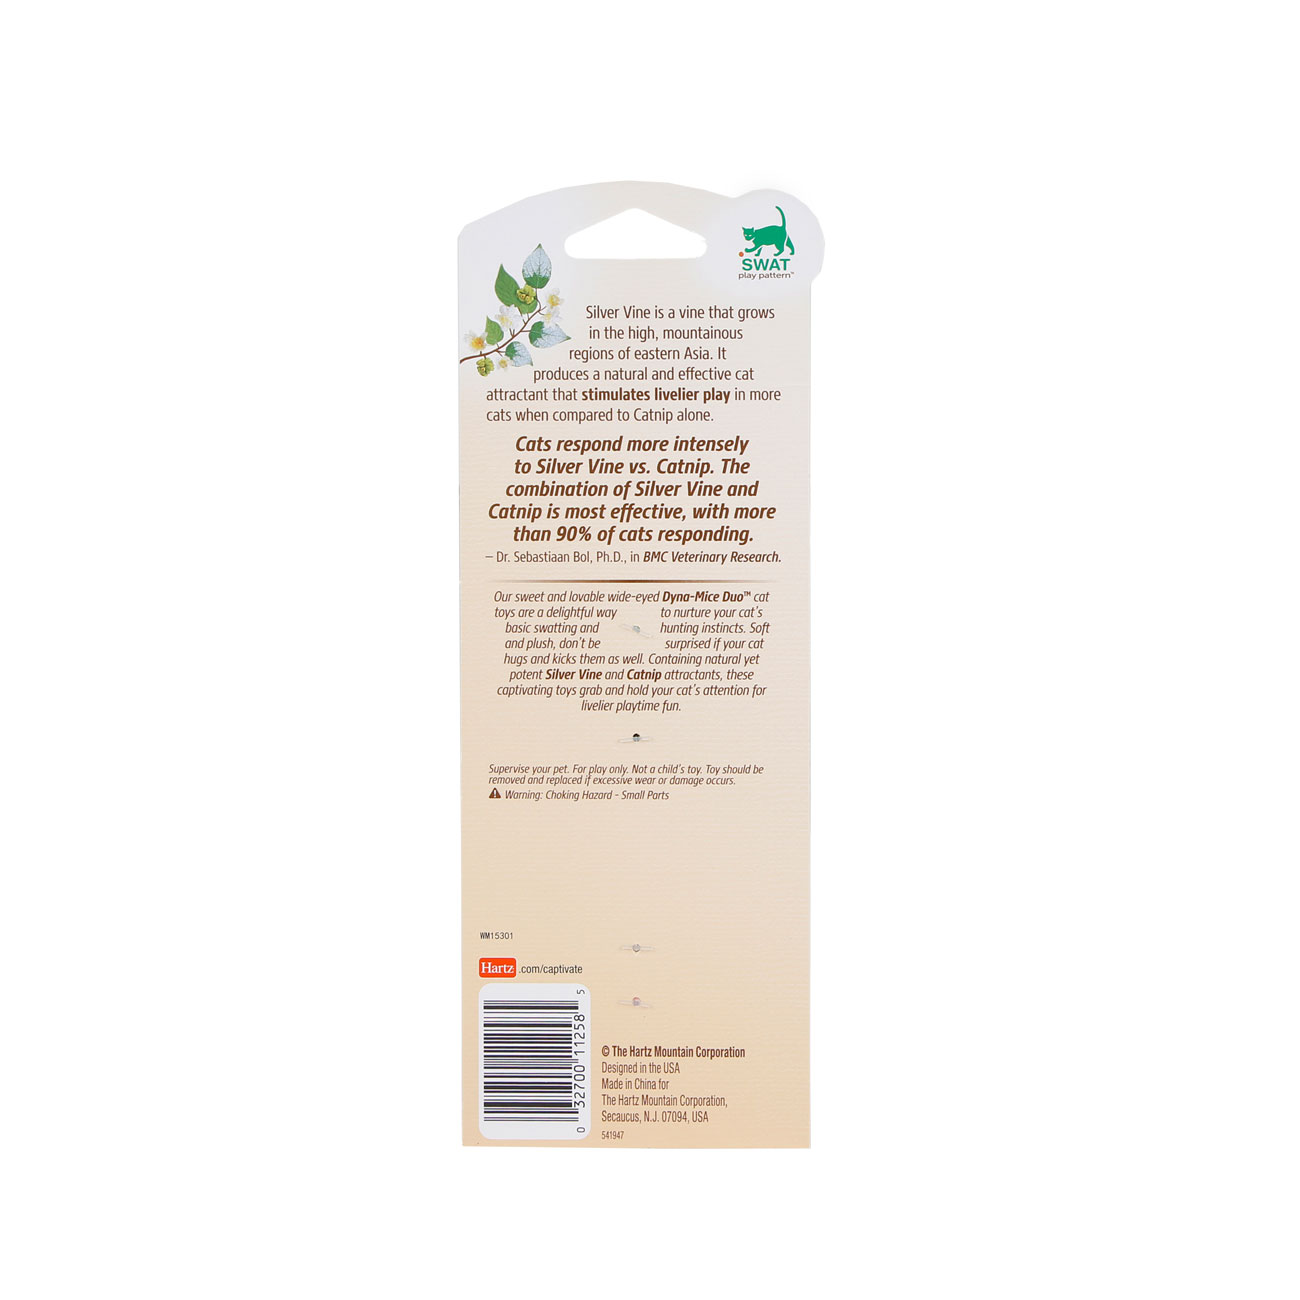 Hartz captivate dyna-mice duo cat toy with silver vine and catnip. Back of package. Hartz SKU# 3270011258